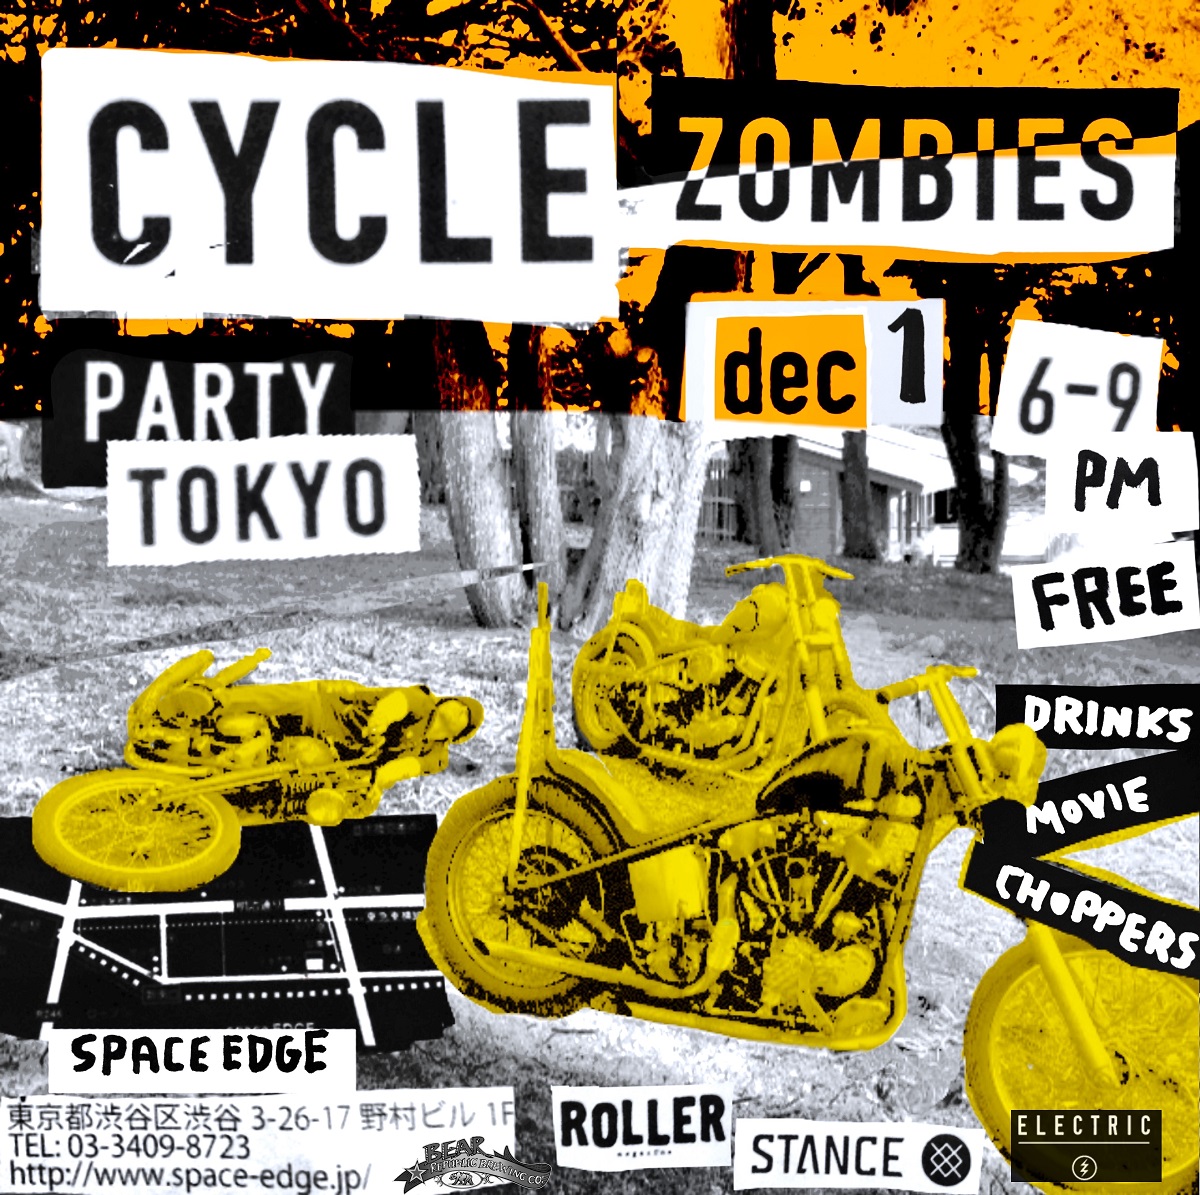 CYCLE ZOMBIES CHOPPER PARTY